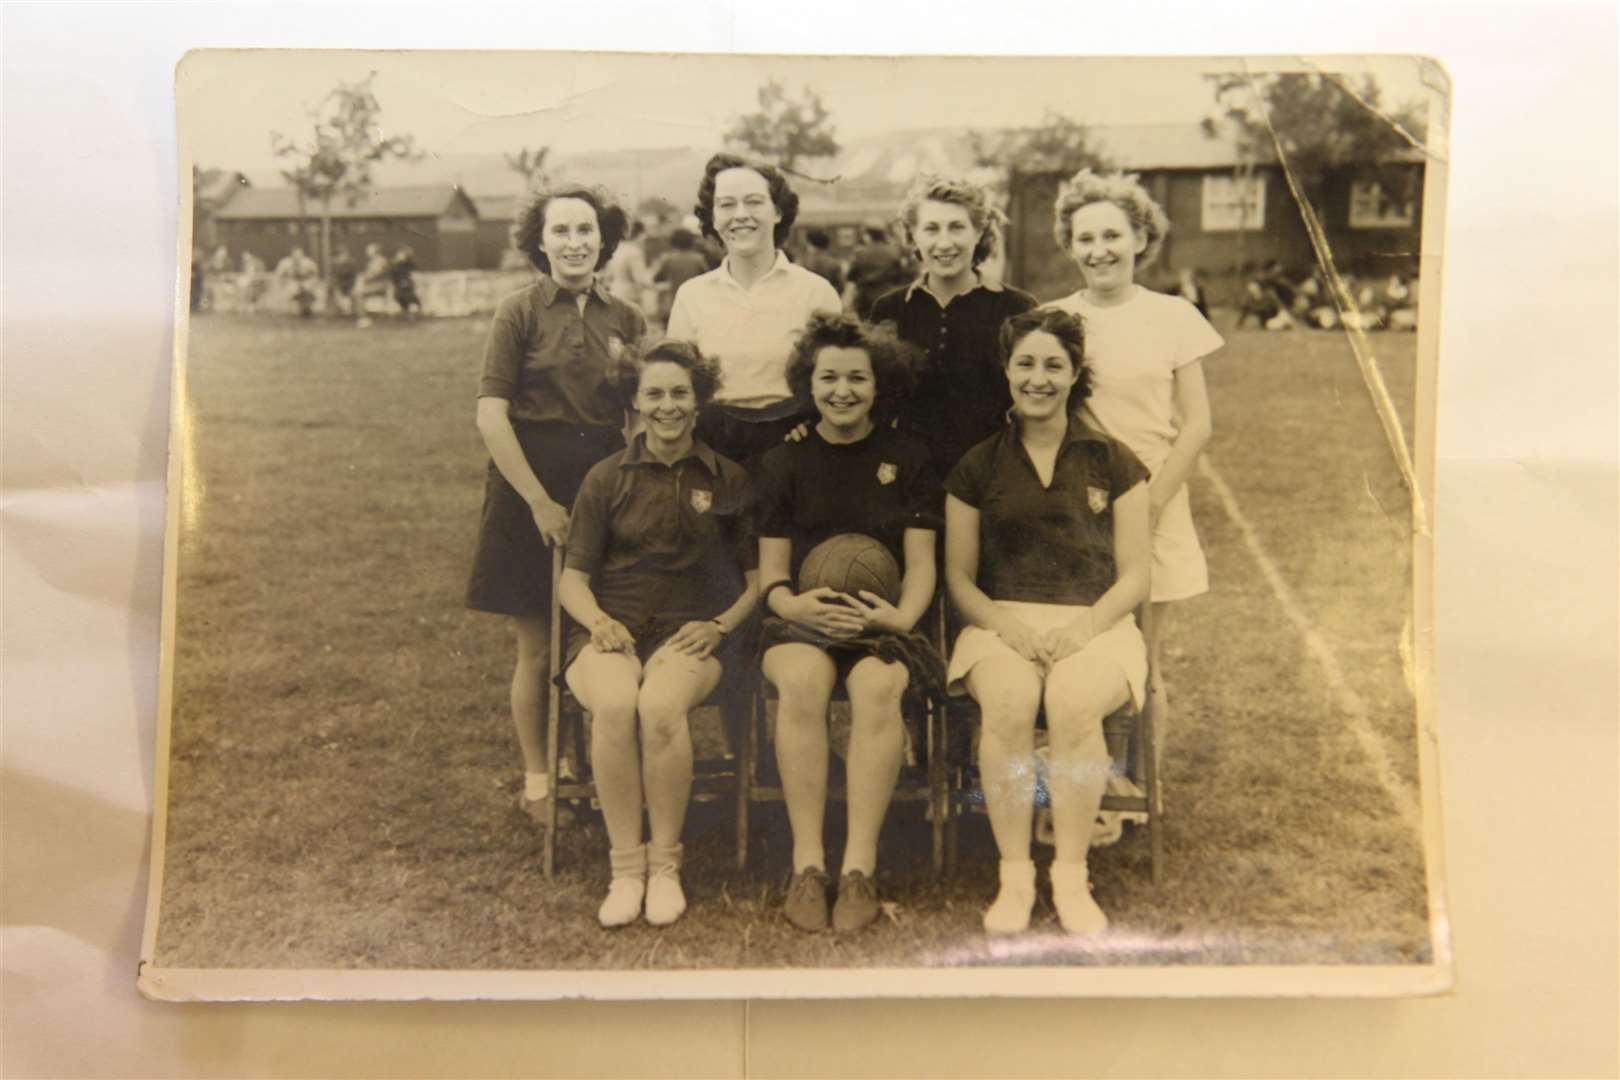 Pam Woolmer seen in this photograph front centre. This is Pam in the TA at Maidstone Barracks about 1950